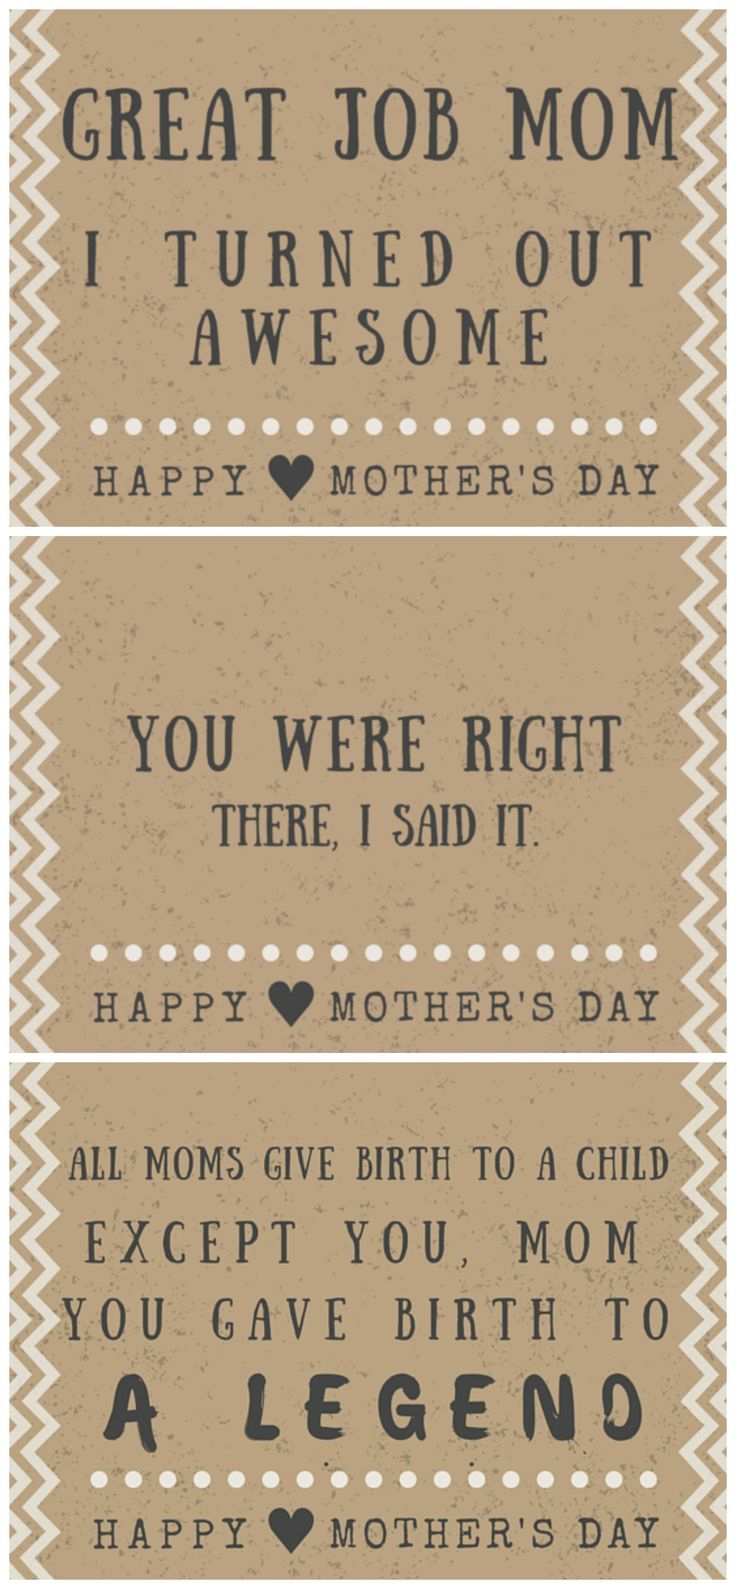 30 Funny Mother&amp;#039;s Day Cards - Free Printables With Hilarious Quotes - Free Printable Funny Mother&amp;amp;#039;s Day Cards